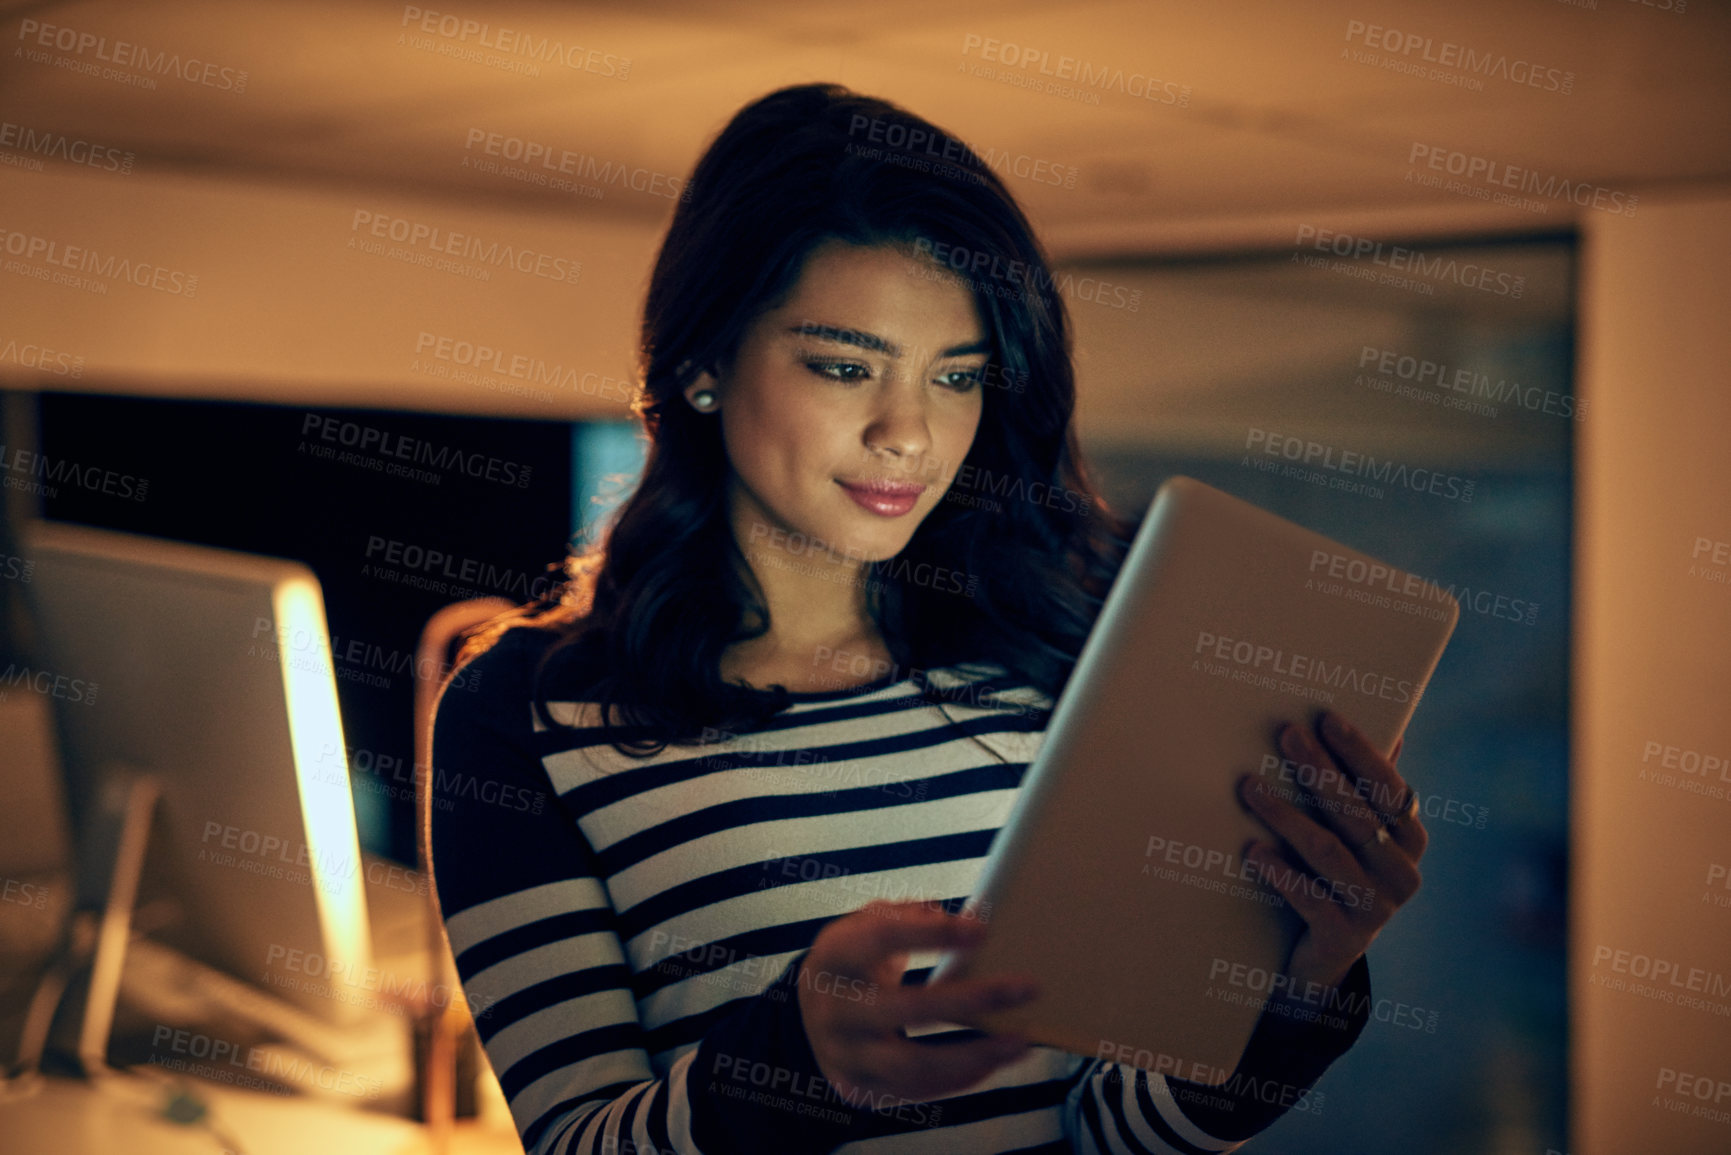 Buy stock photo Shot of a young businesswoman working late on a digital tablet in an office